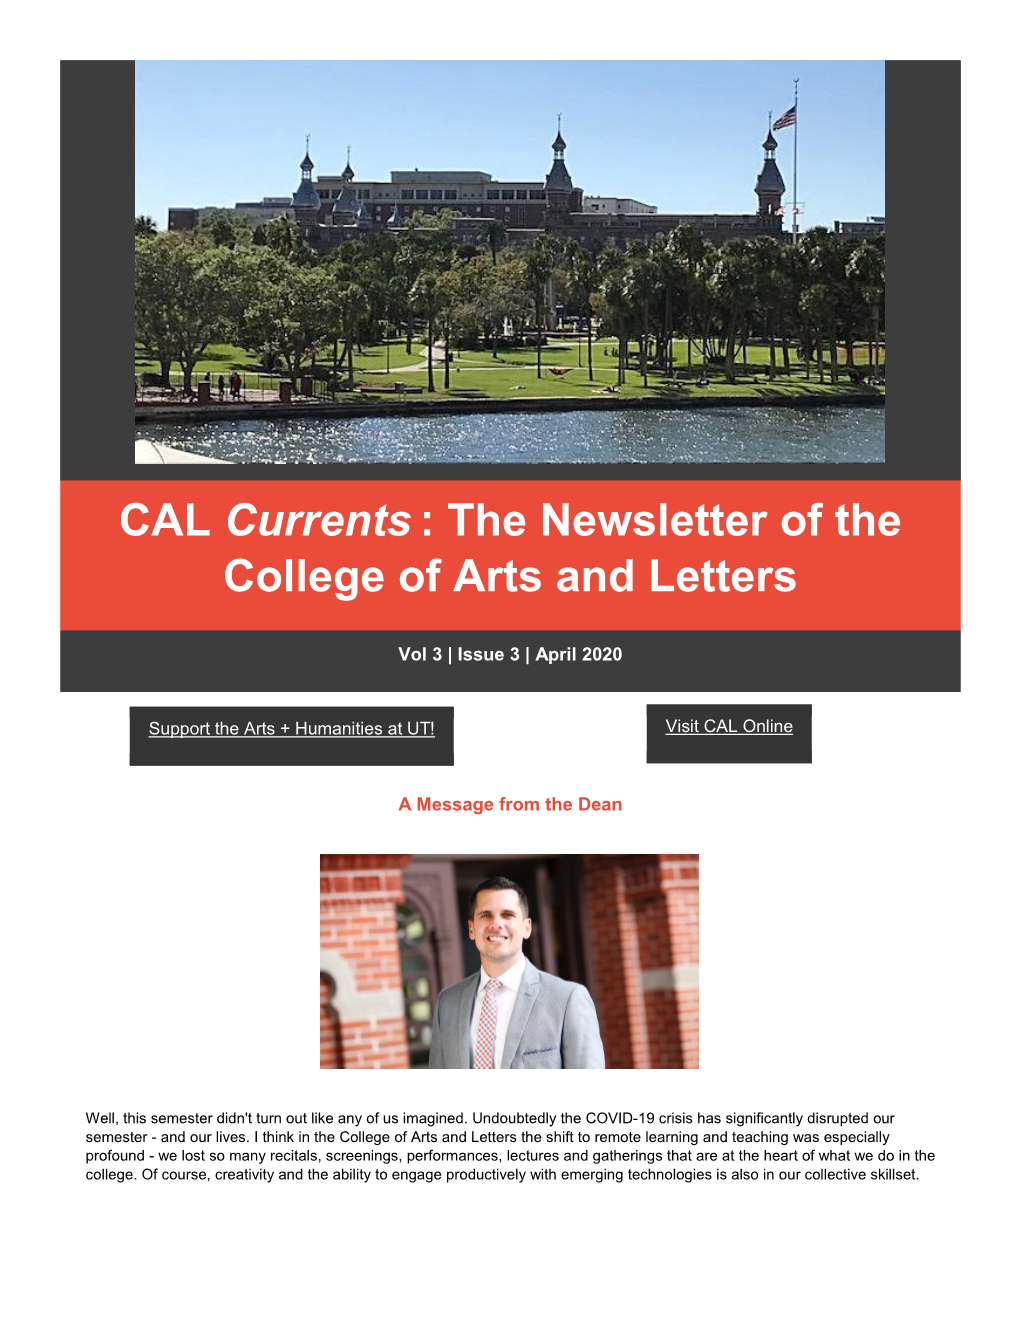 CAL Currents: the Newsletter of the College of Arts and Letters